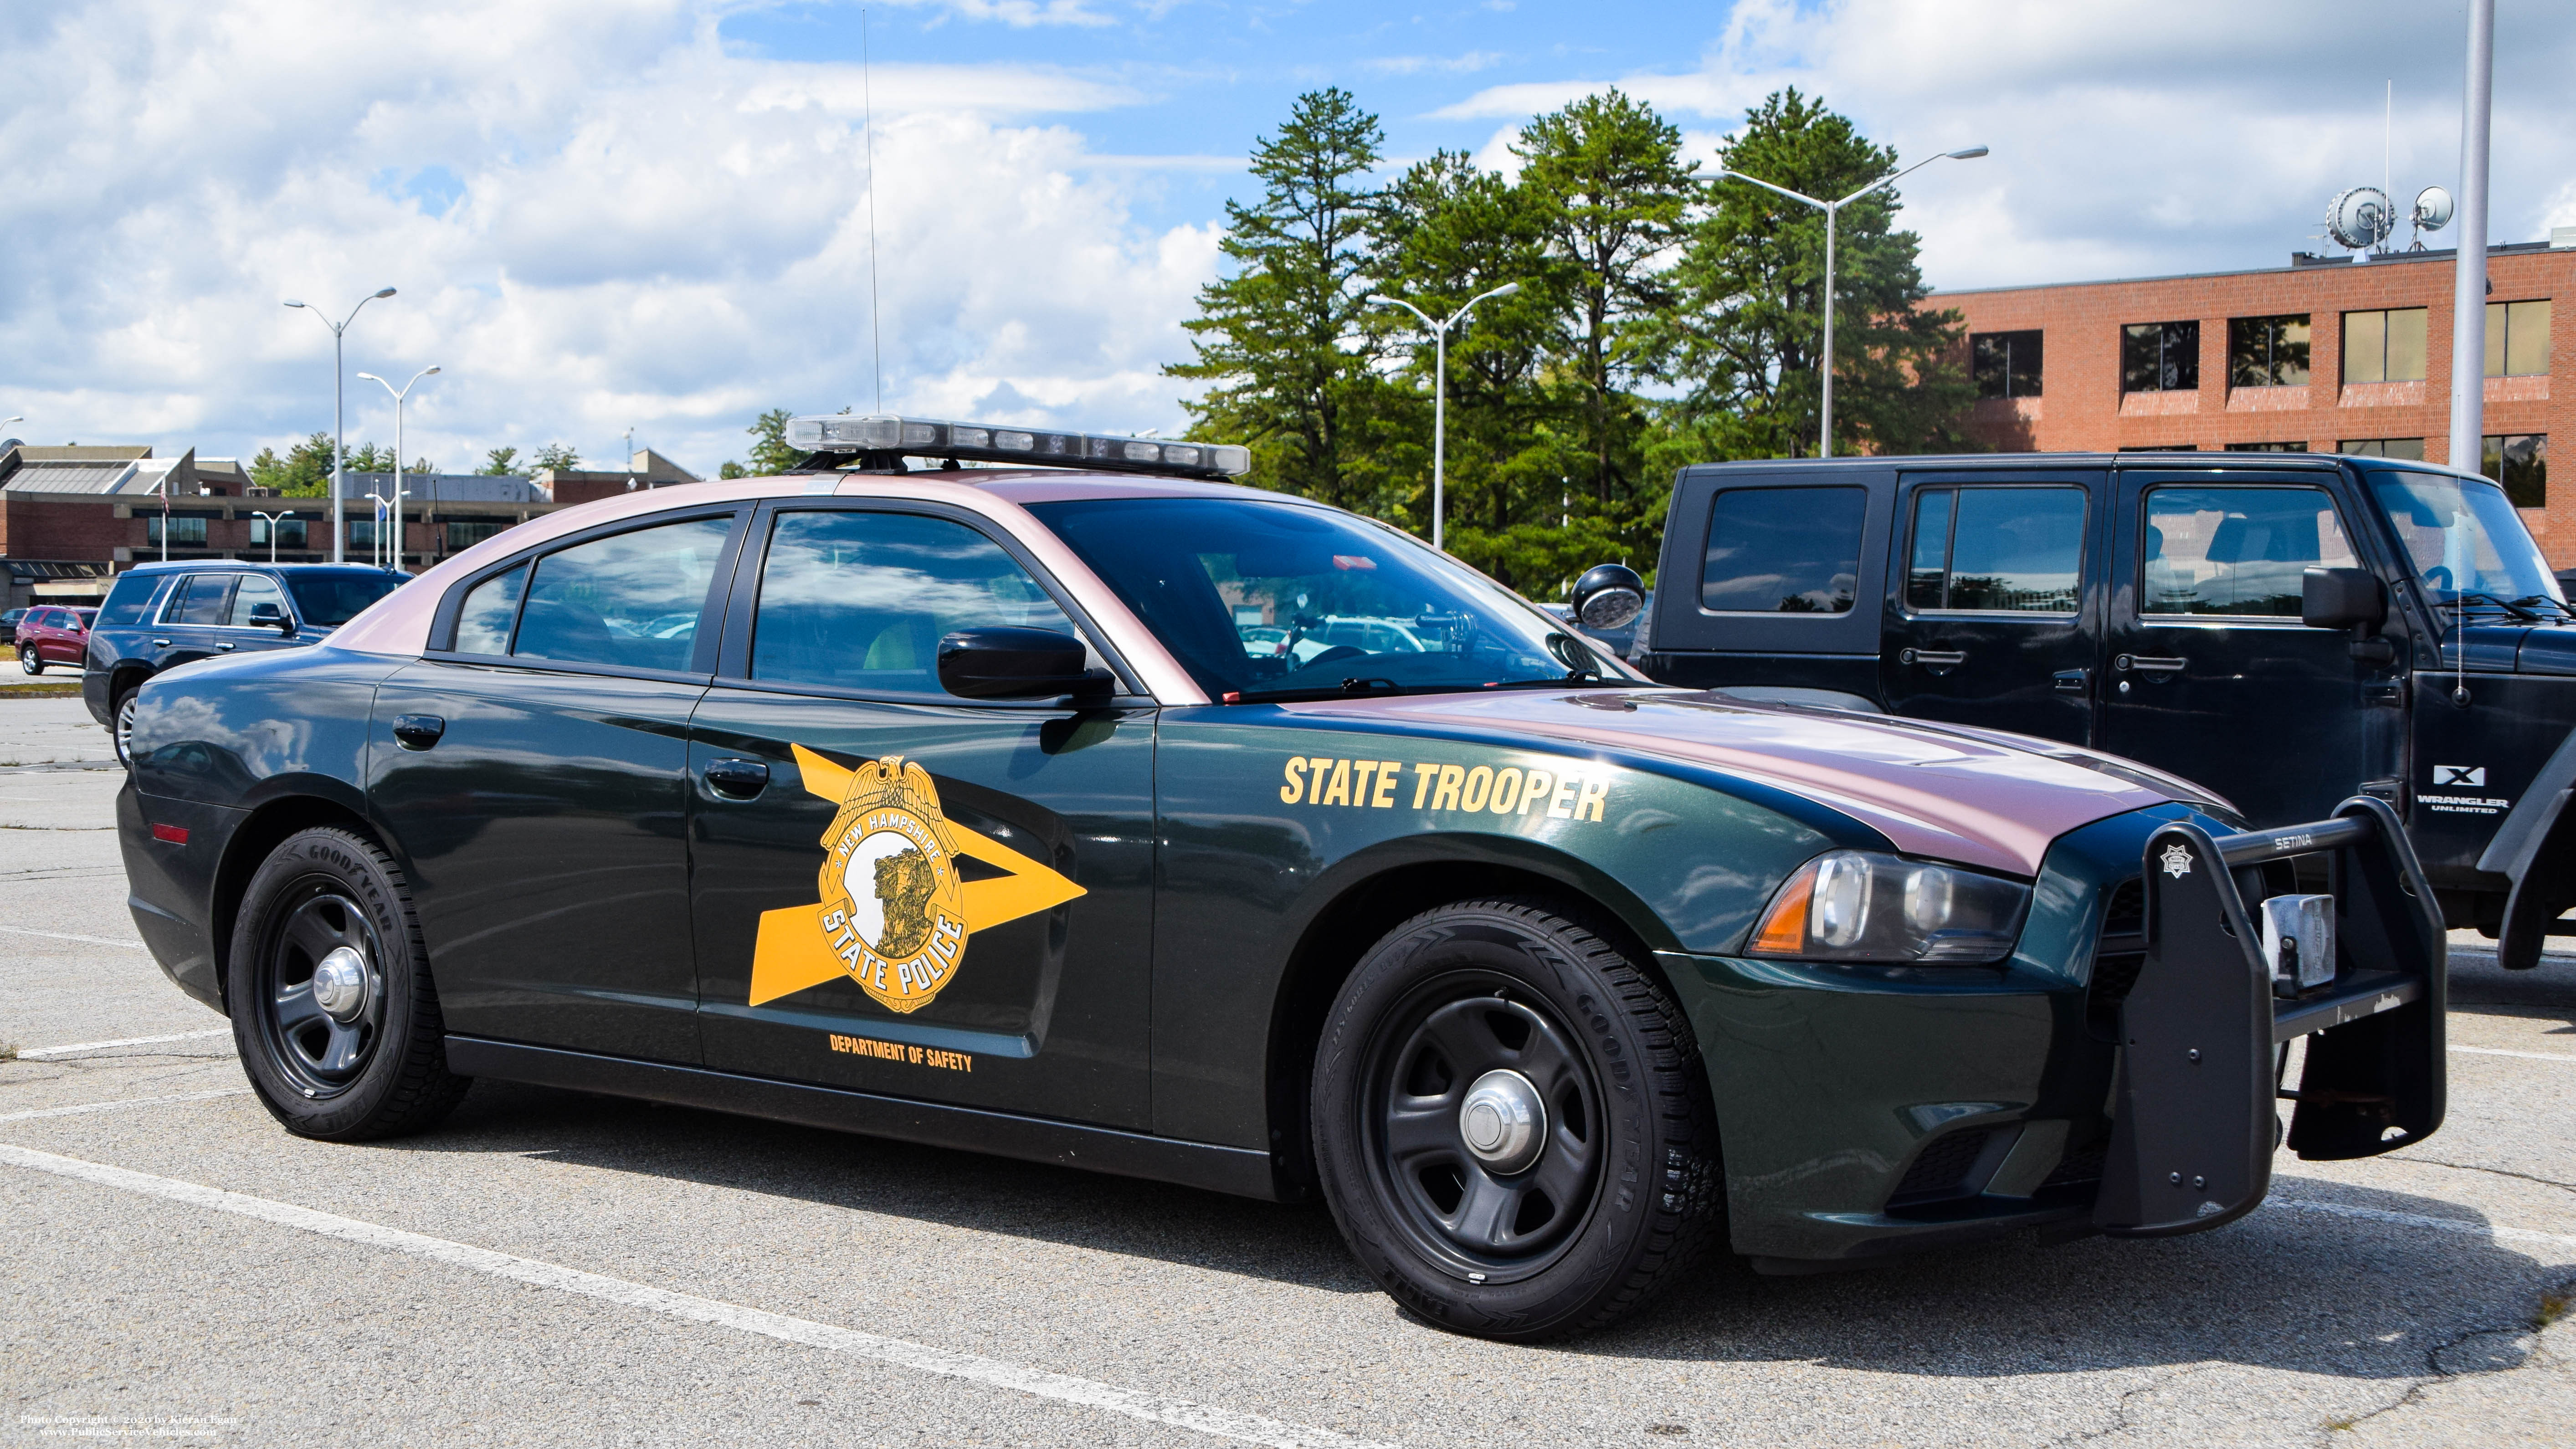 A photo  of New Hampshire State Police
            Cruiser 813, a 2011-2014 Dodge Charger             taken by Kieran Egan